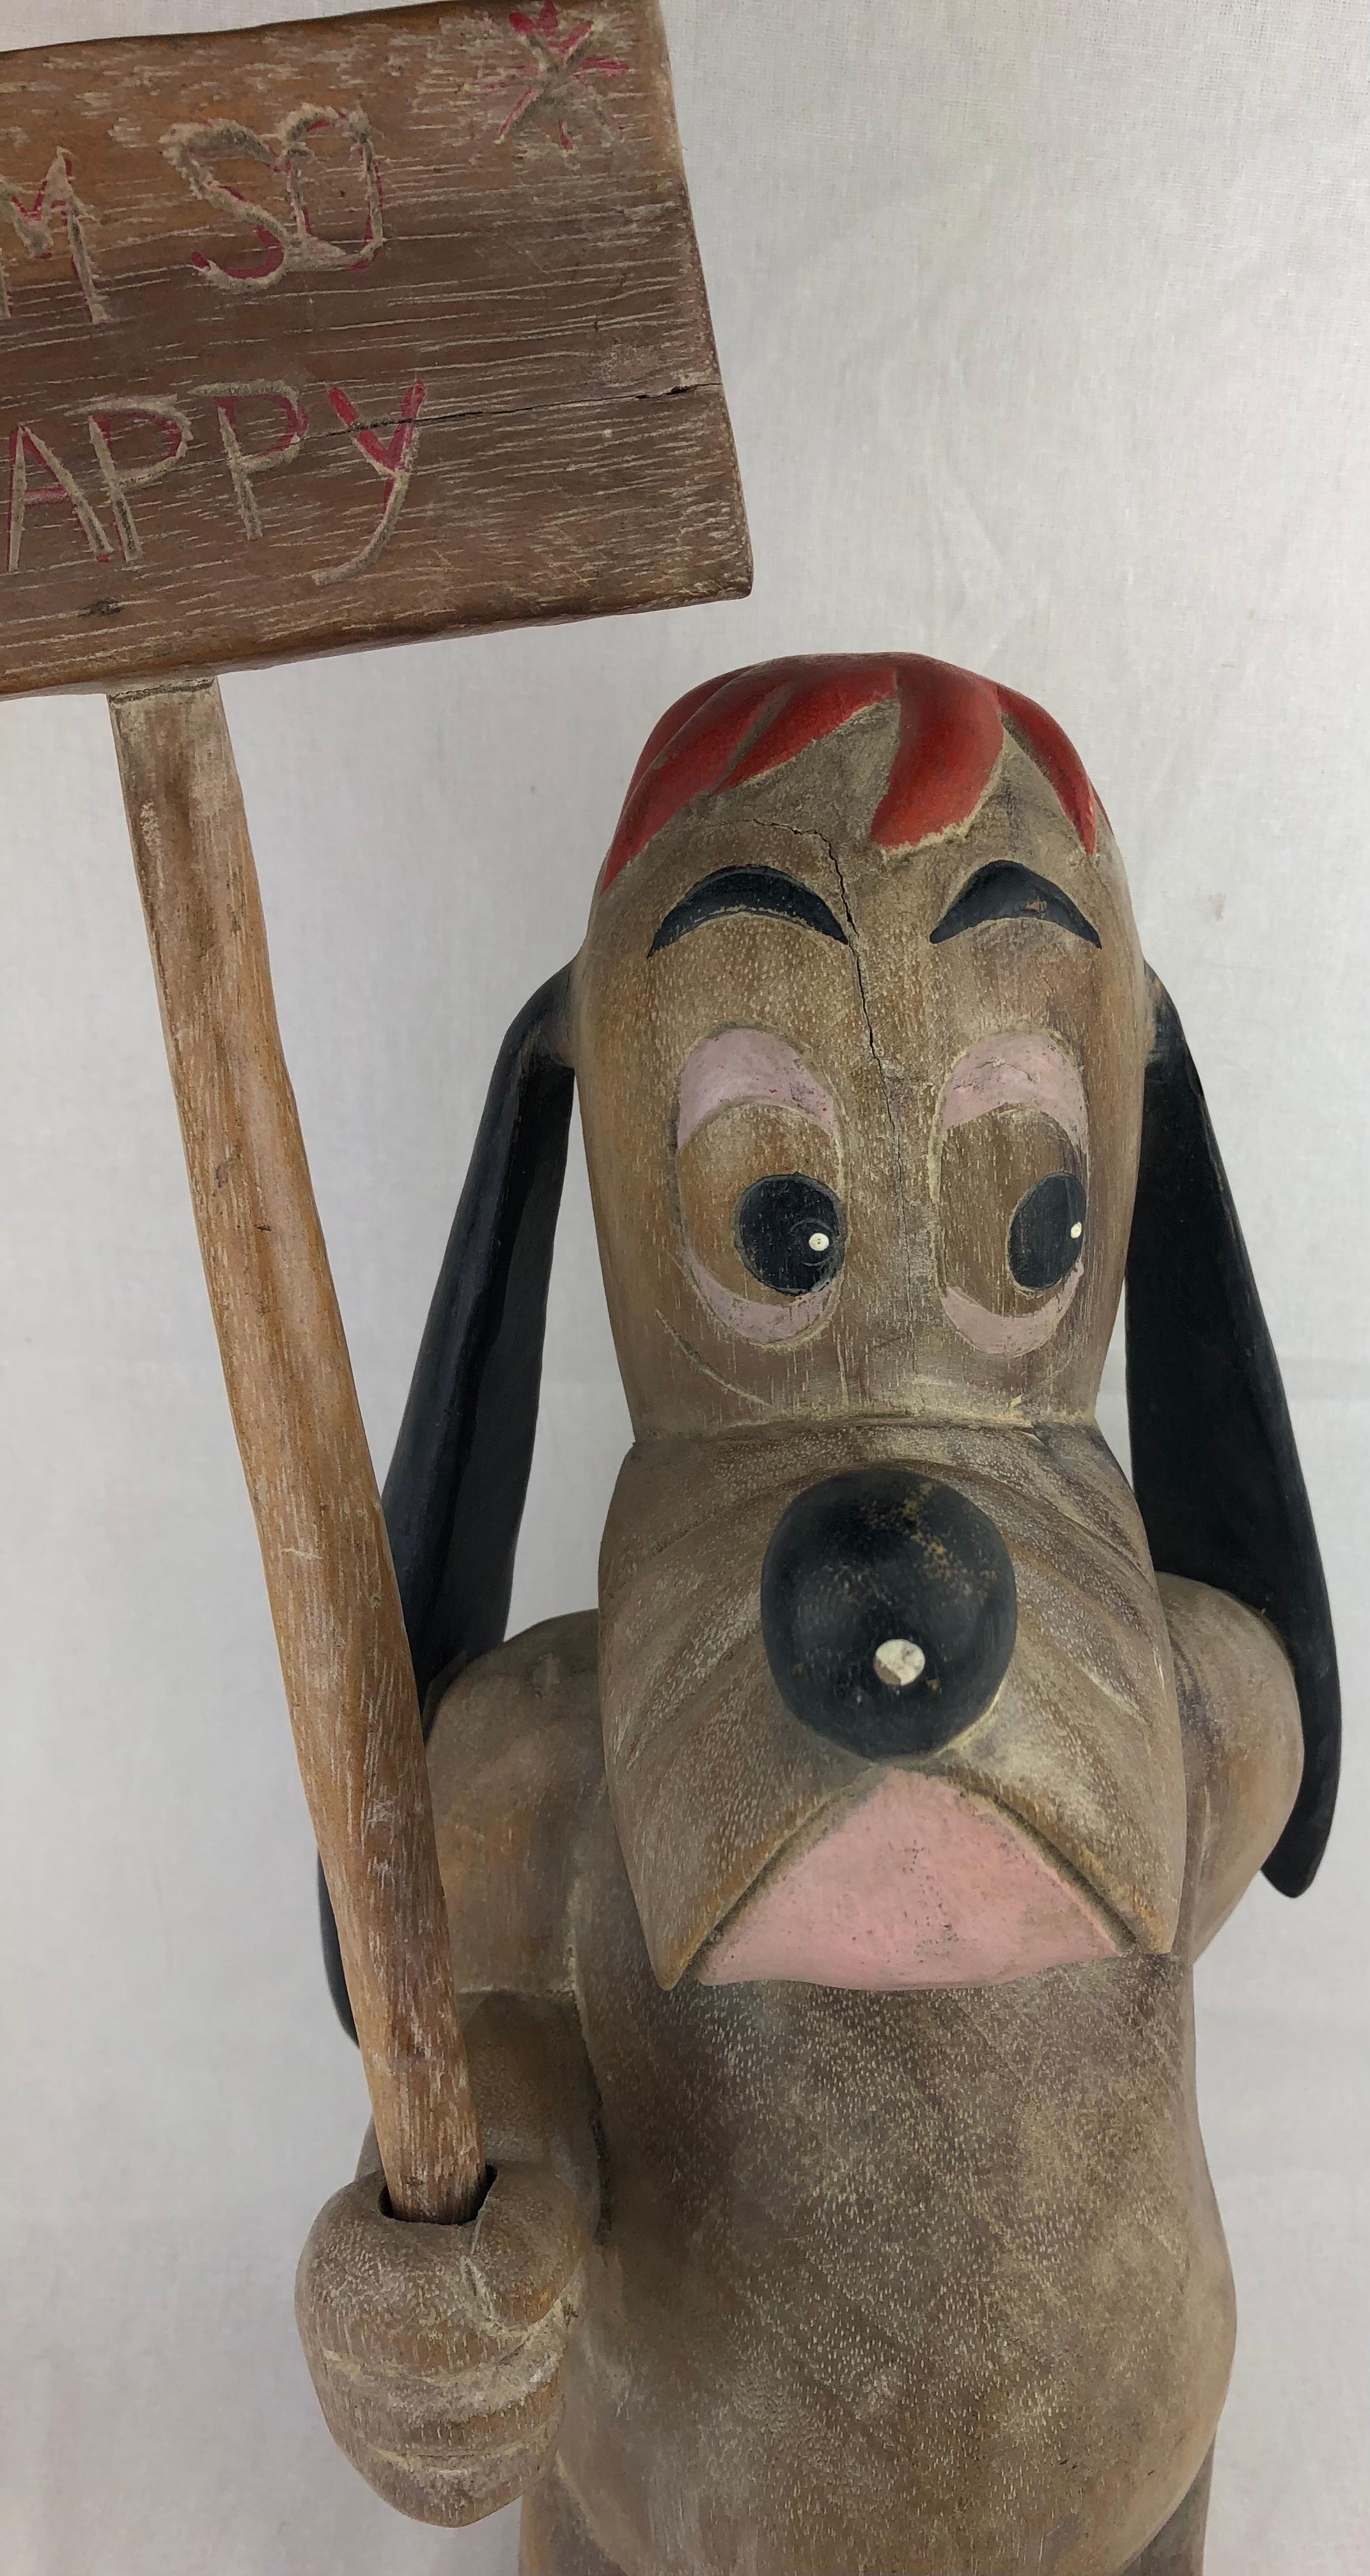 Hand-Carved 1950s Wooden Disney Droopy Sculpture